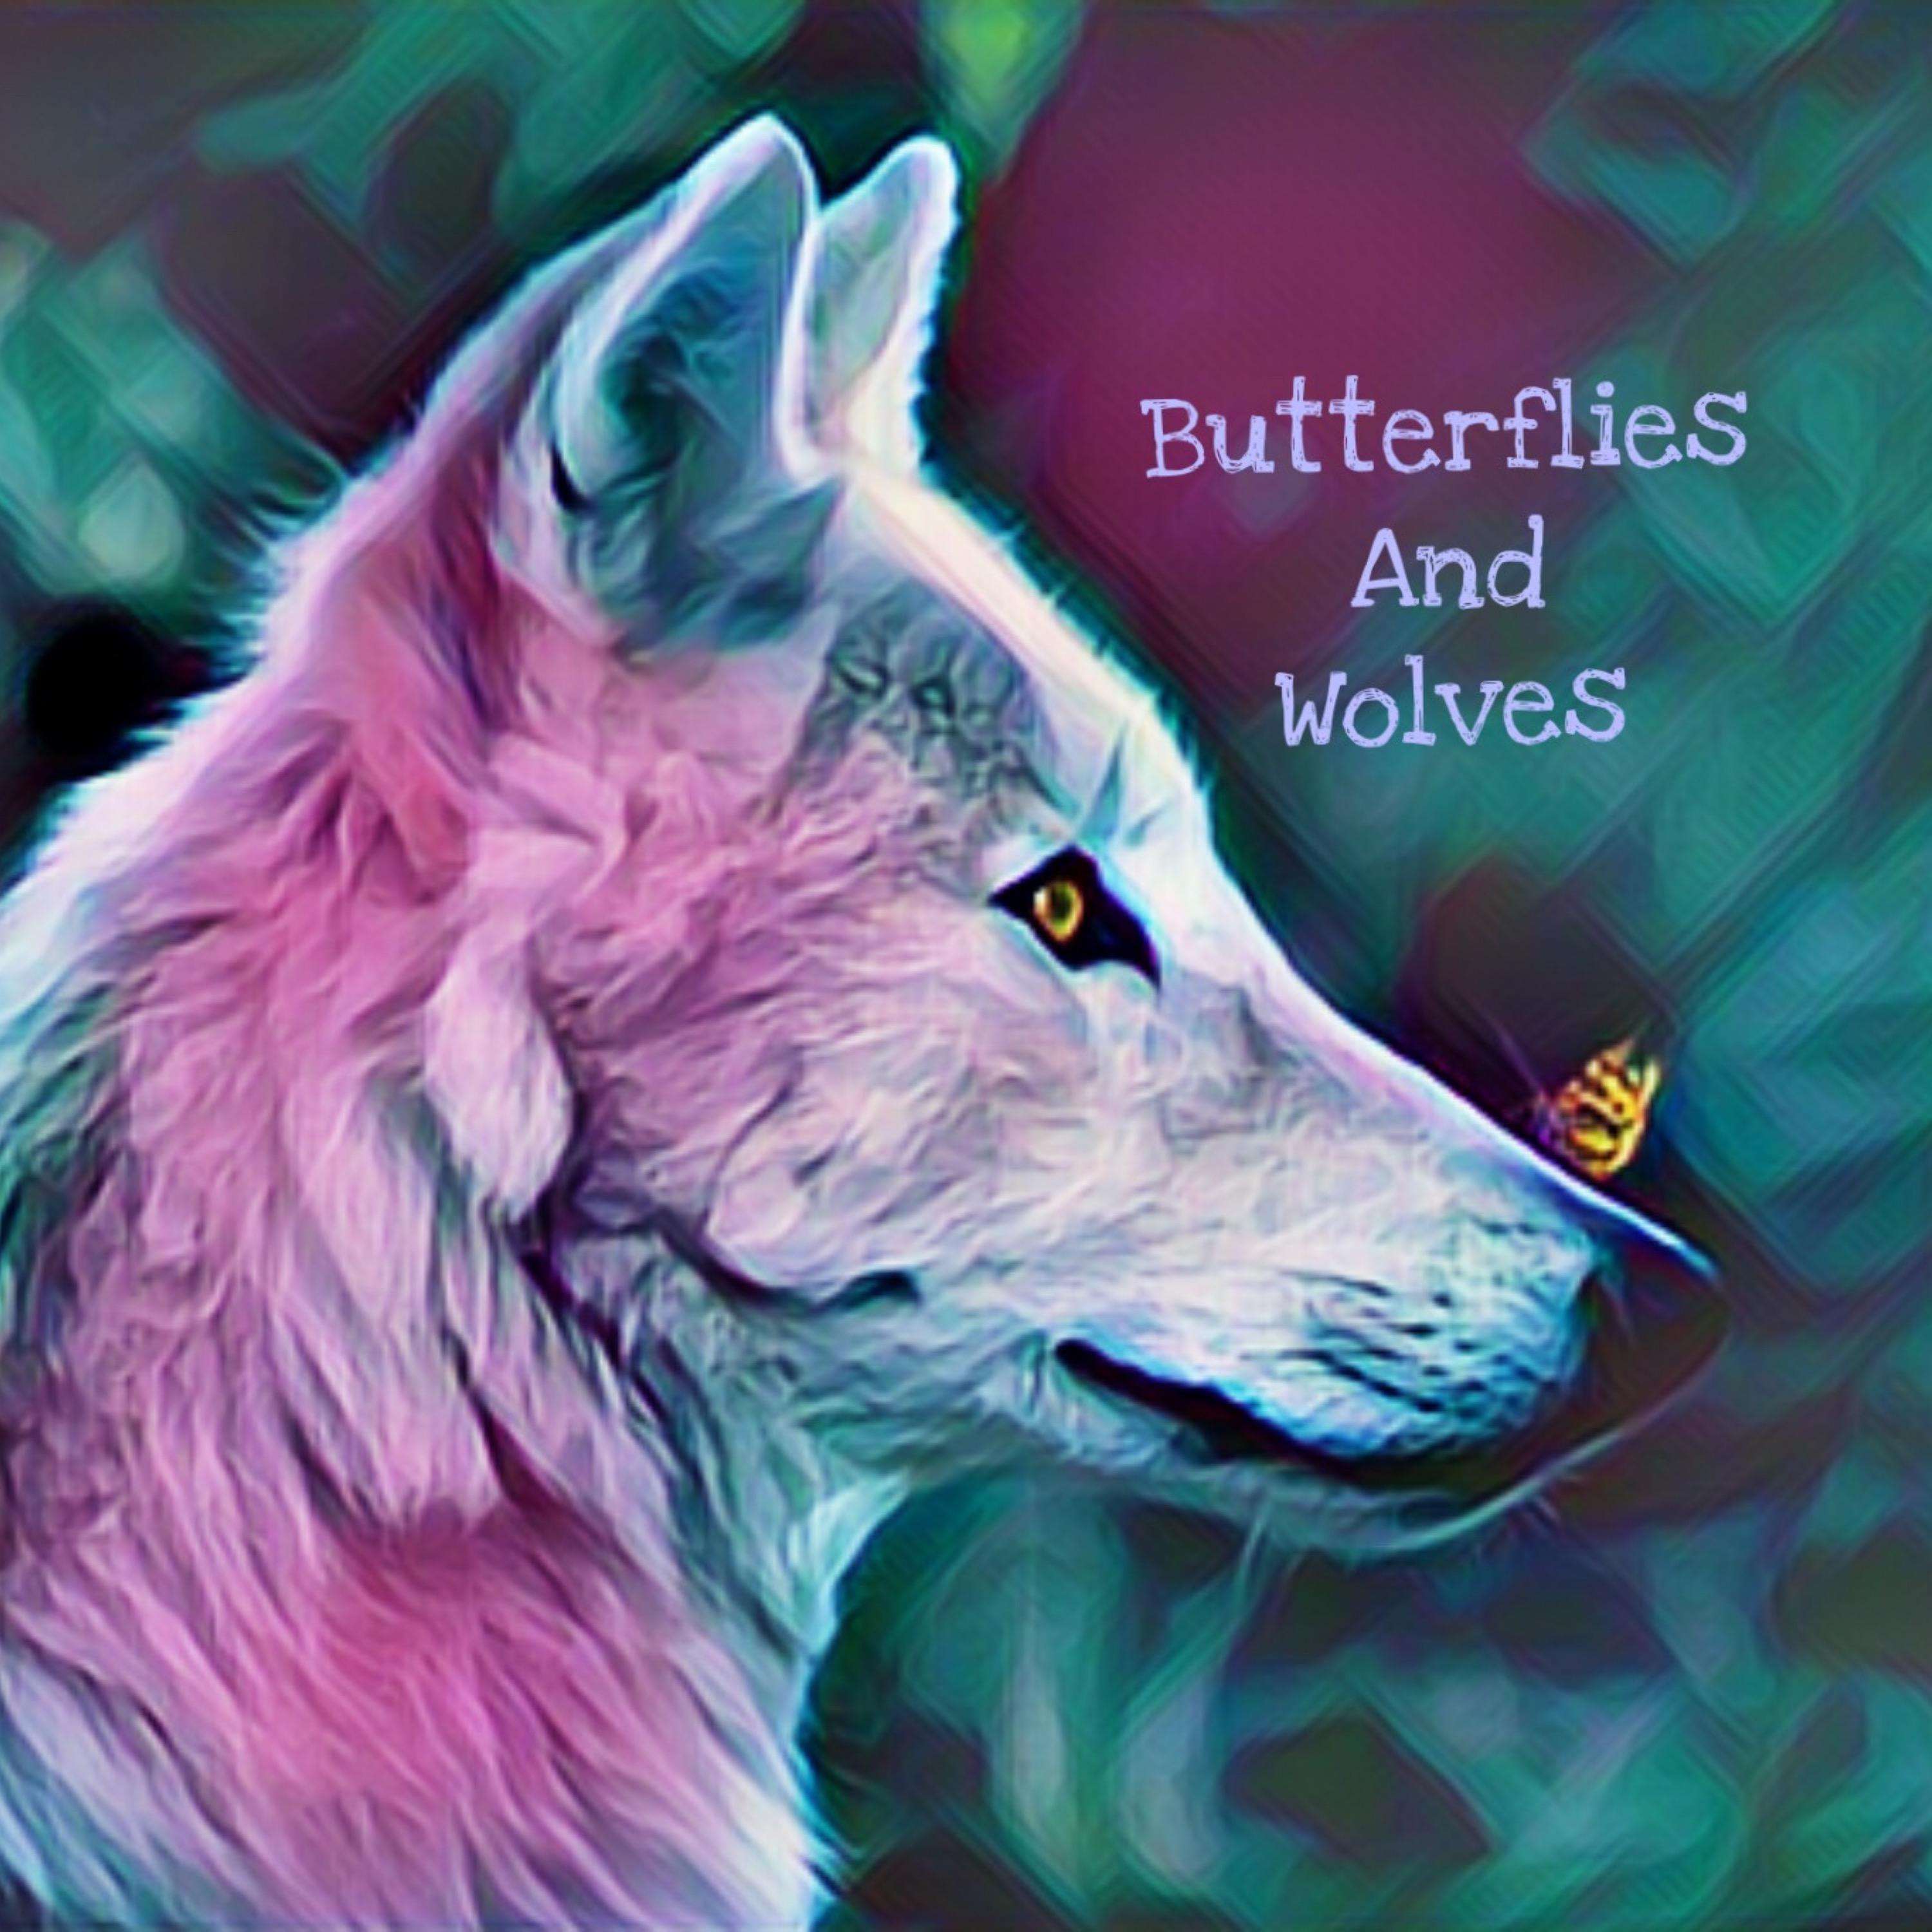 Butterflies and Wolves